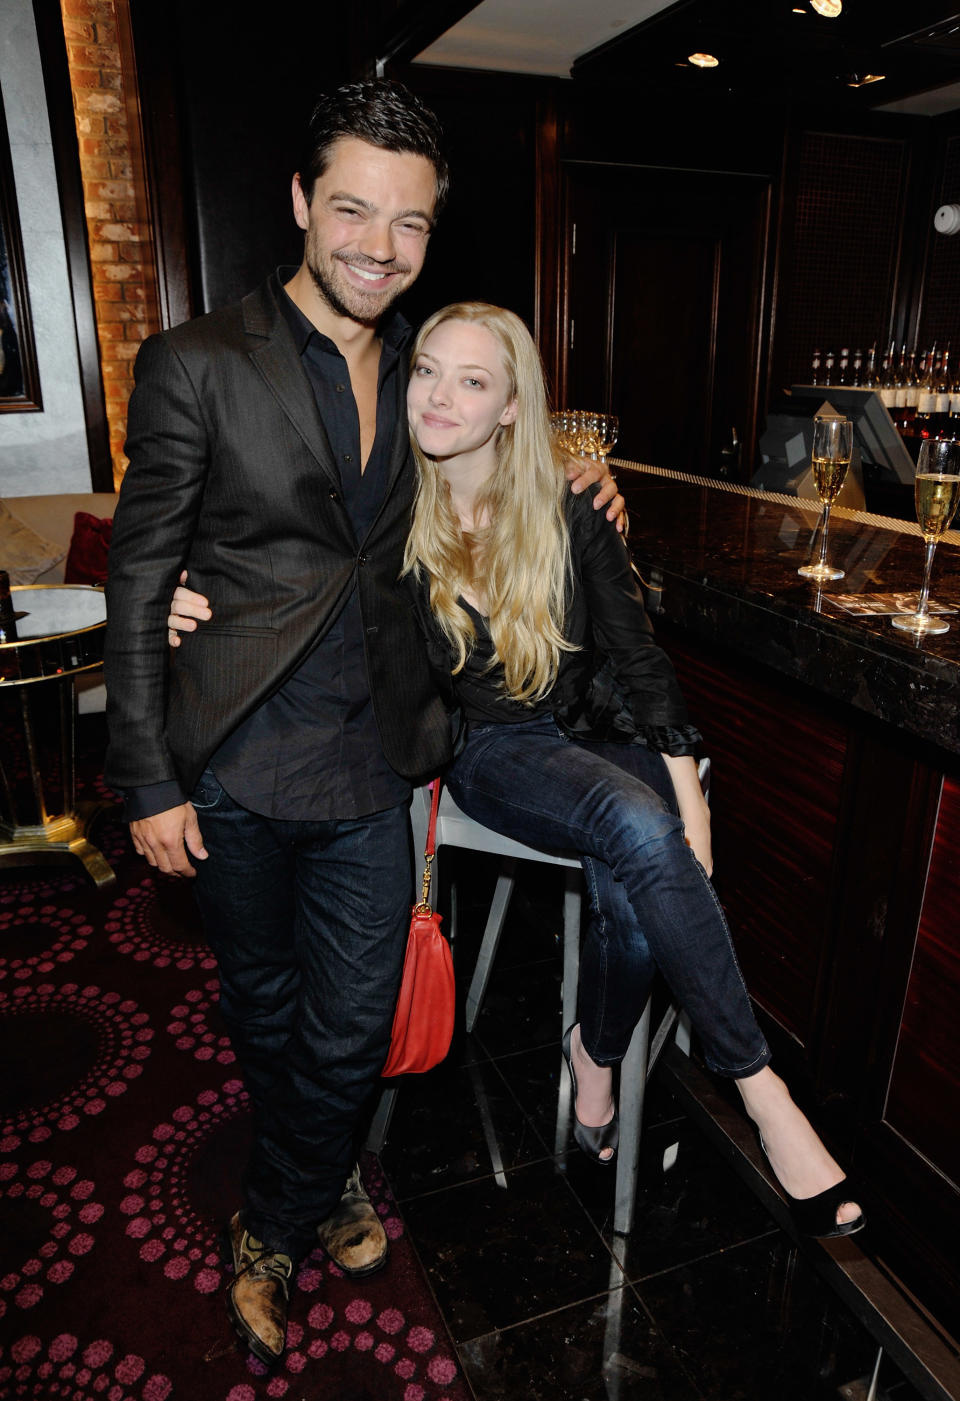 Dominic Cooper and Amanda Seyfried had a date night at a London movie premiere on April 21, 2009. (Photo: Jon Furniss/WireImage)